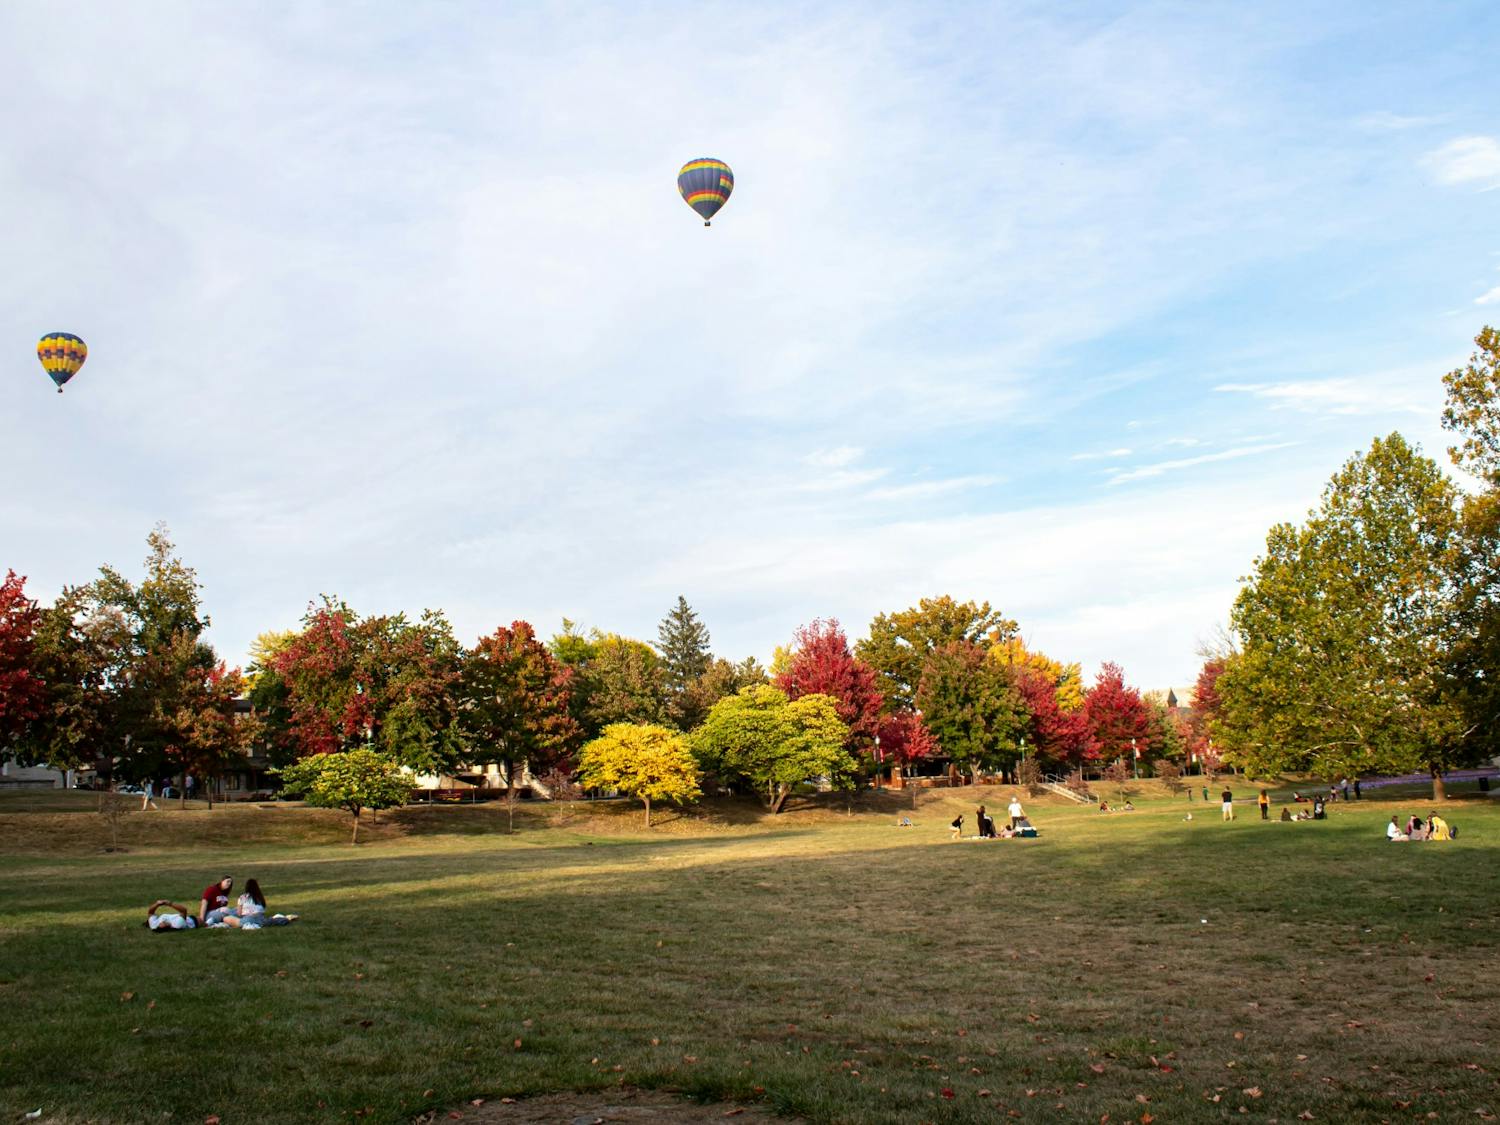 GALLERY: Students enjoy fall on IU's campus